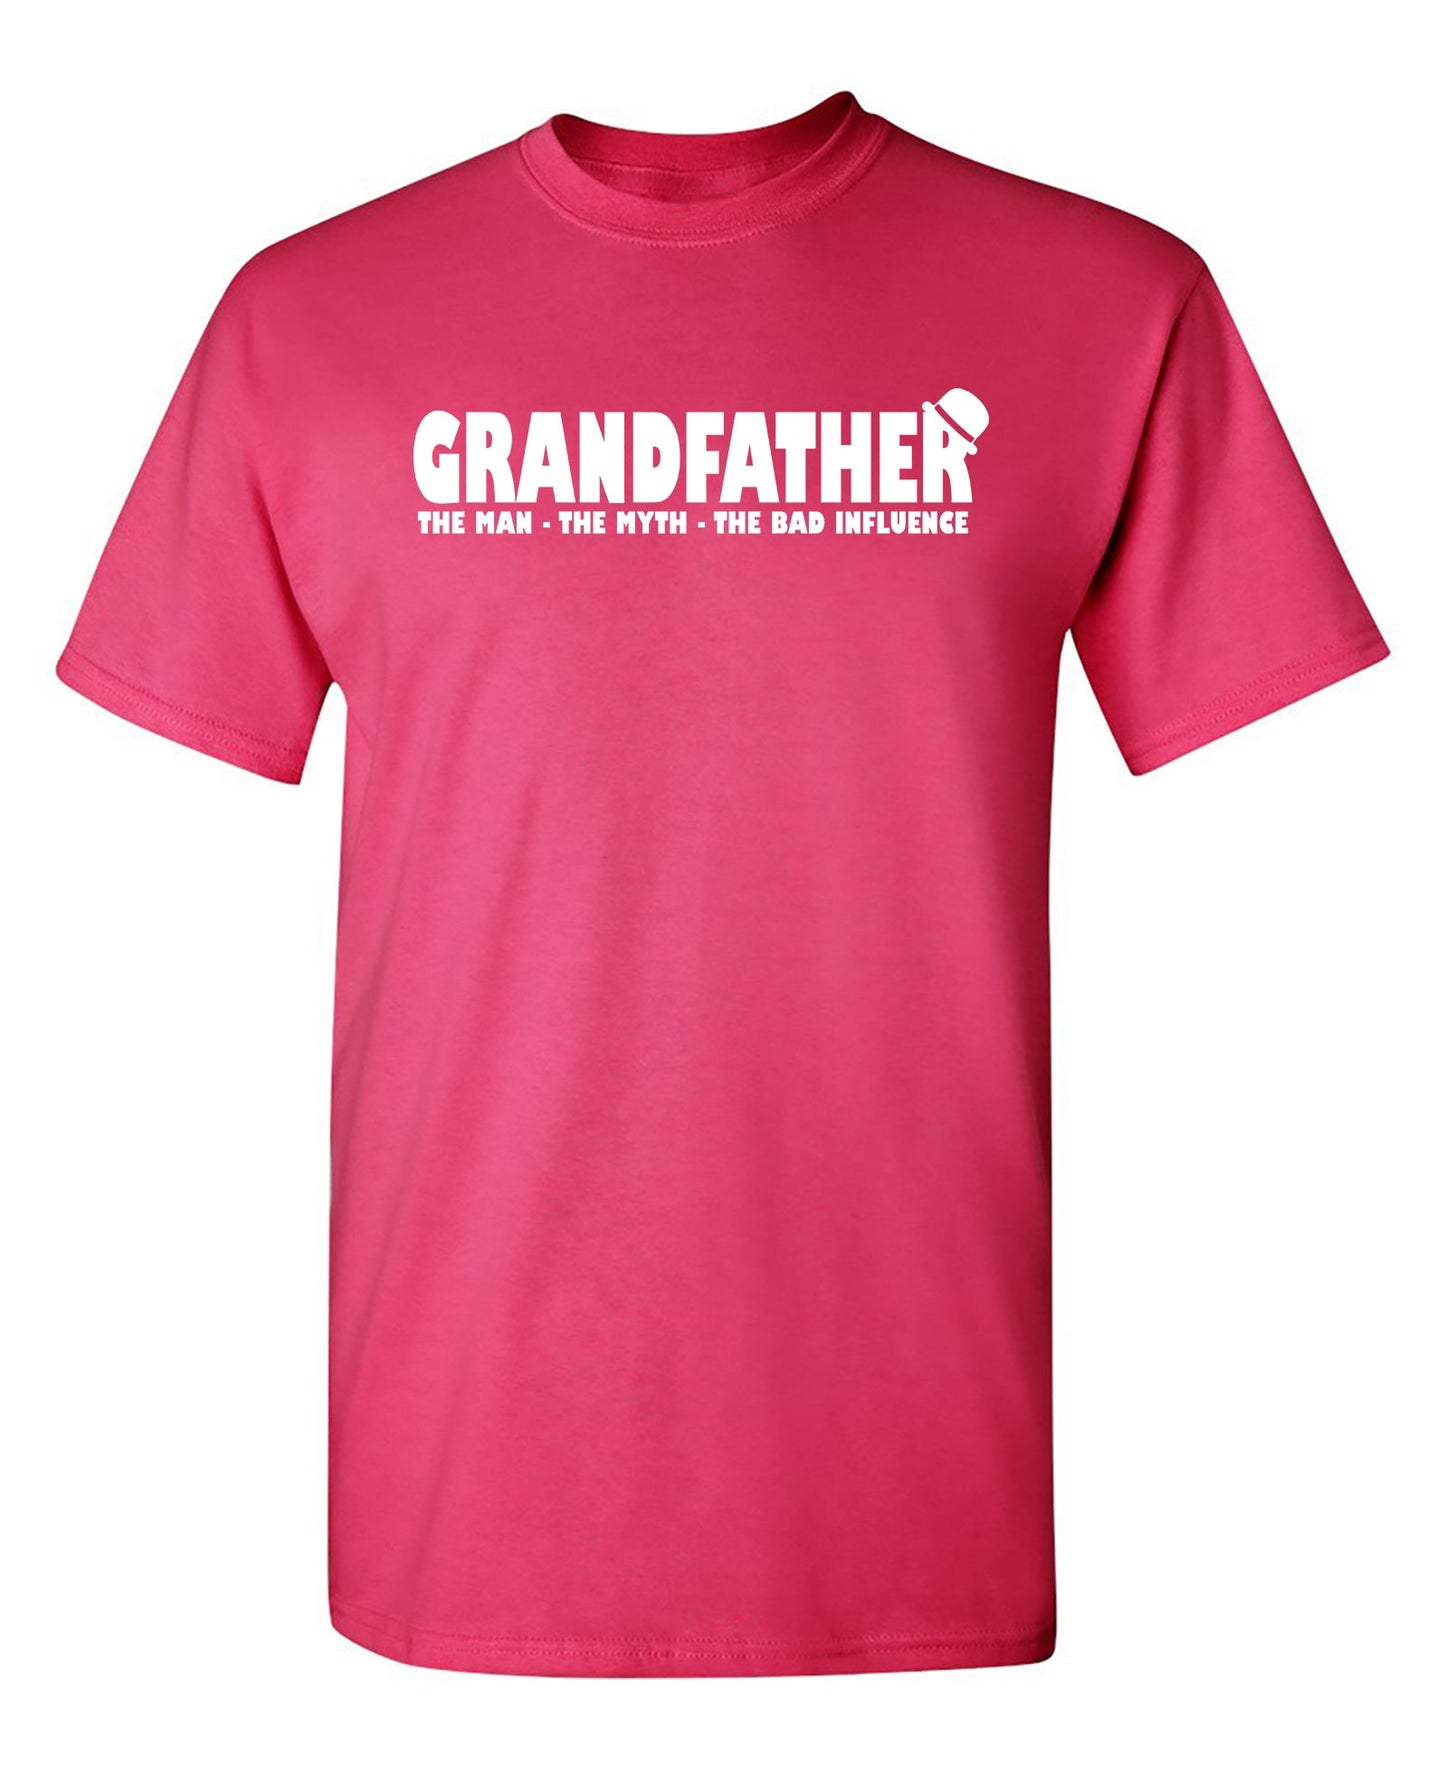 Grandfather, The Man, The Myth, The Bad Influence - Funny T Shirts & Graphic Tees